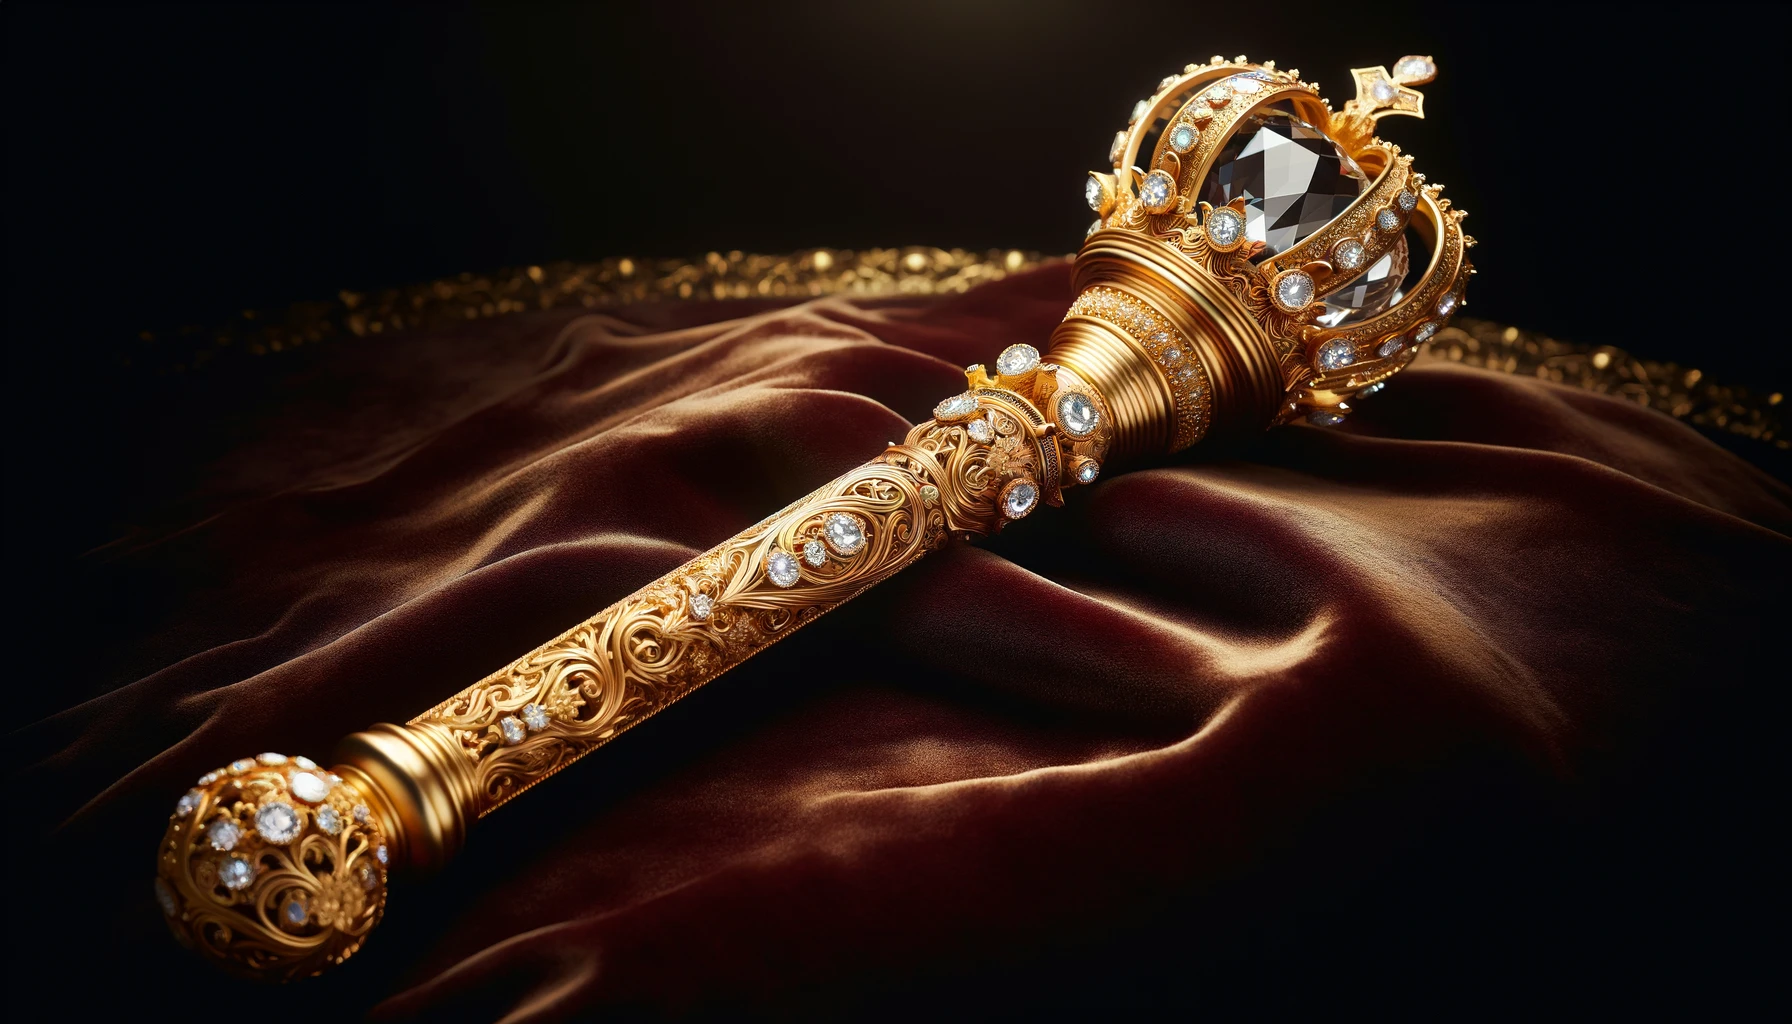 Luxurious gold scepter with intricate patterns and precious gems on velvet surface